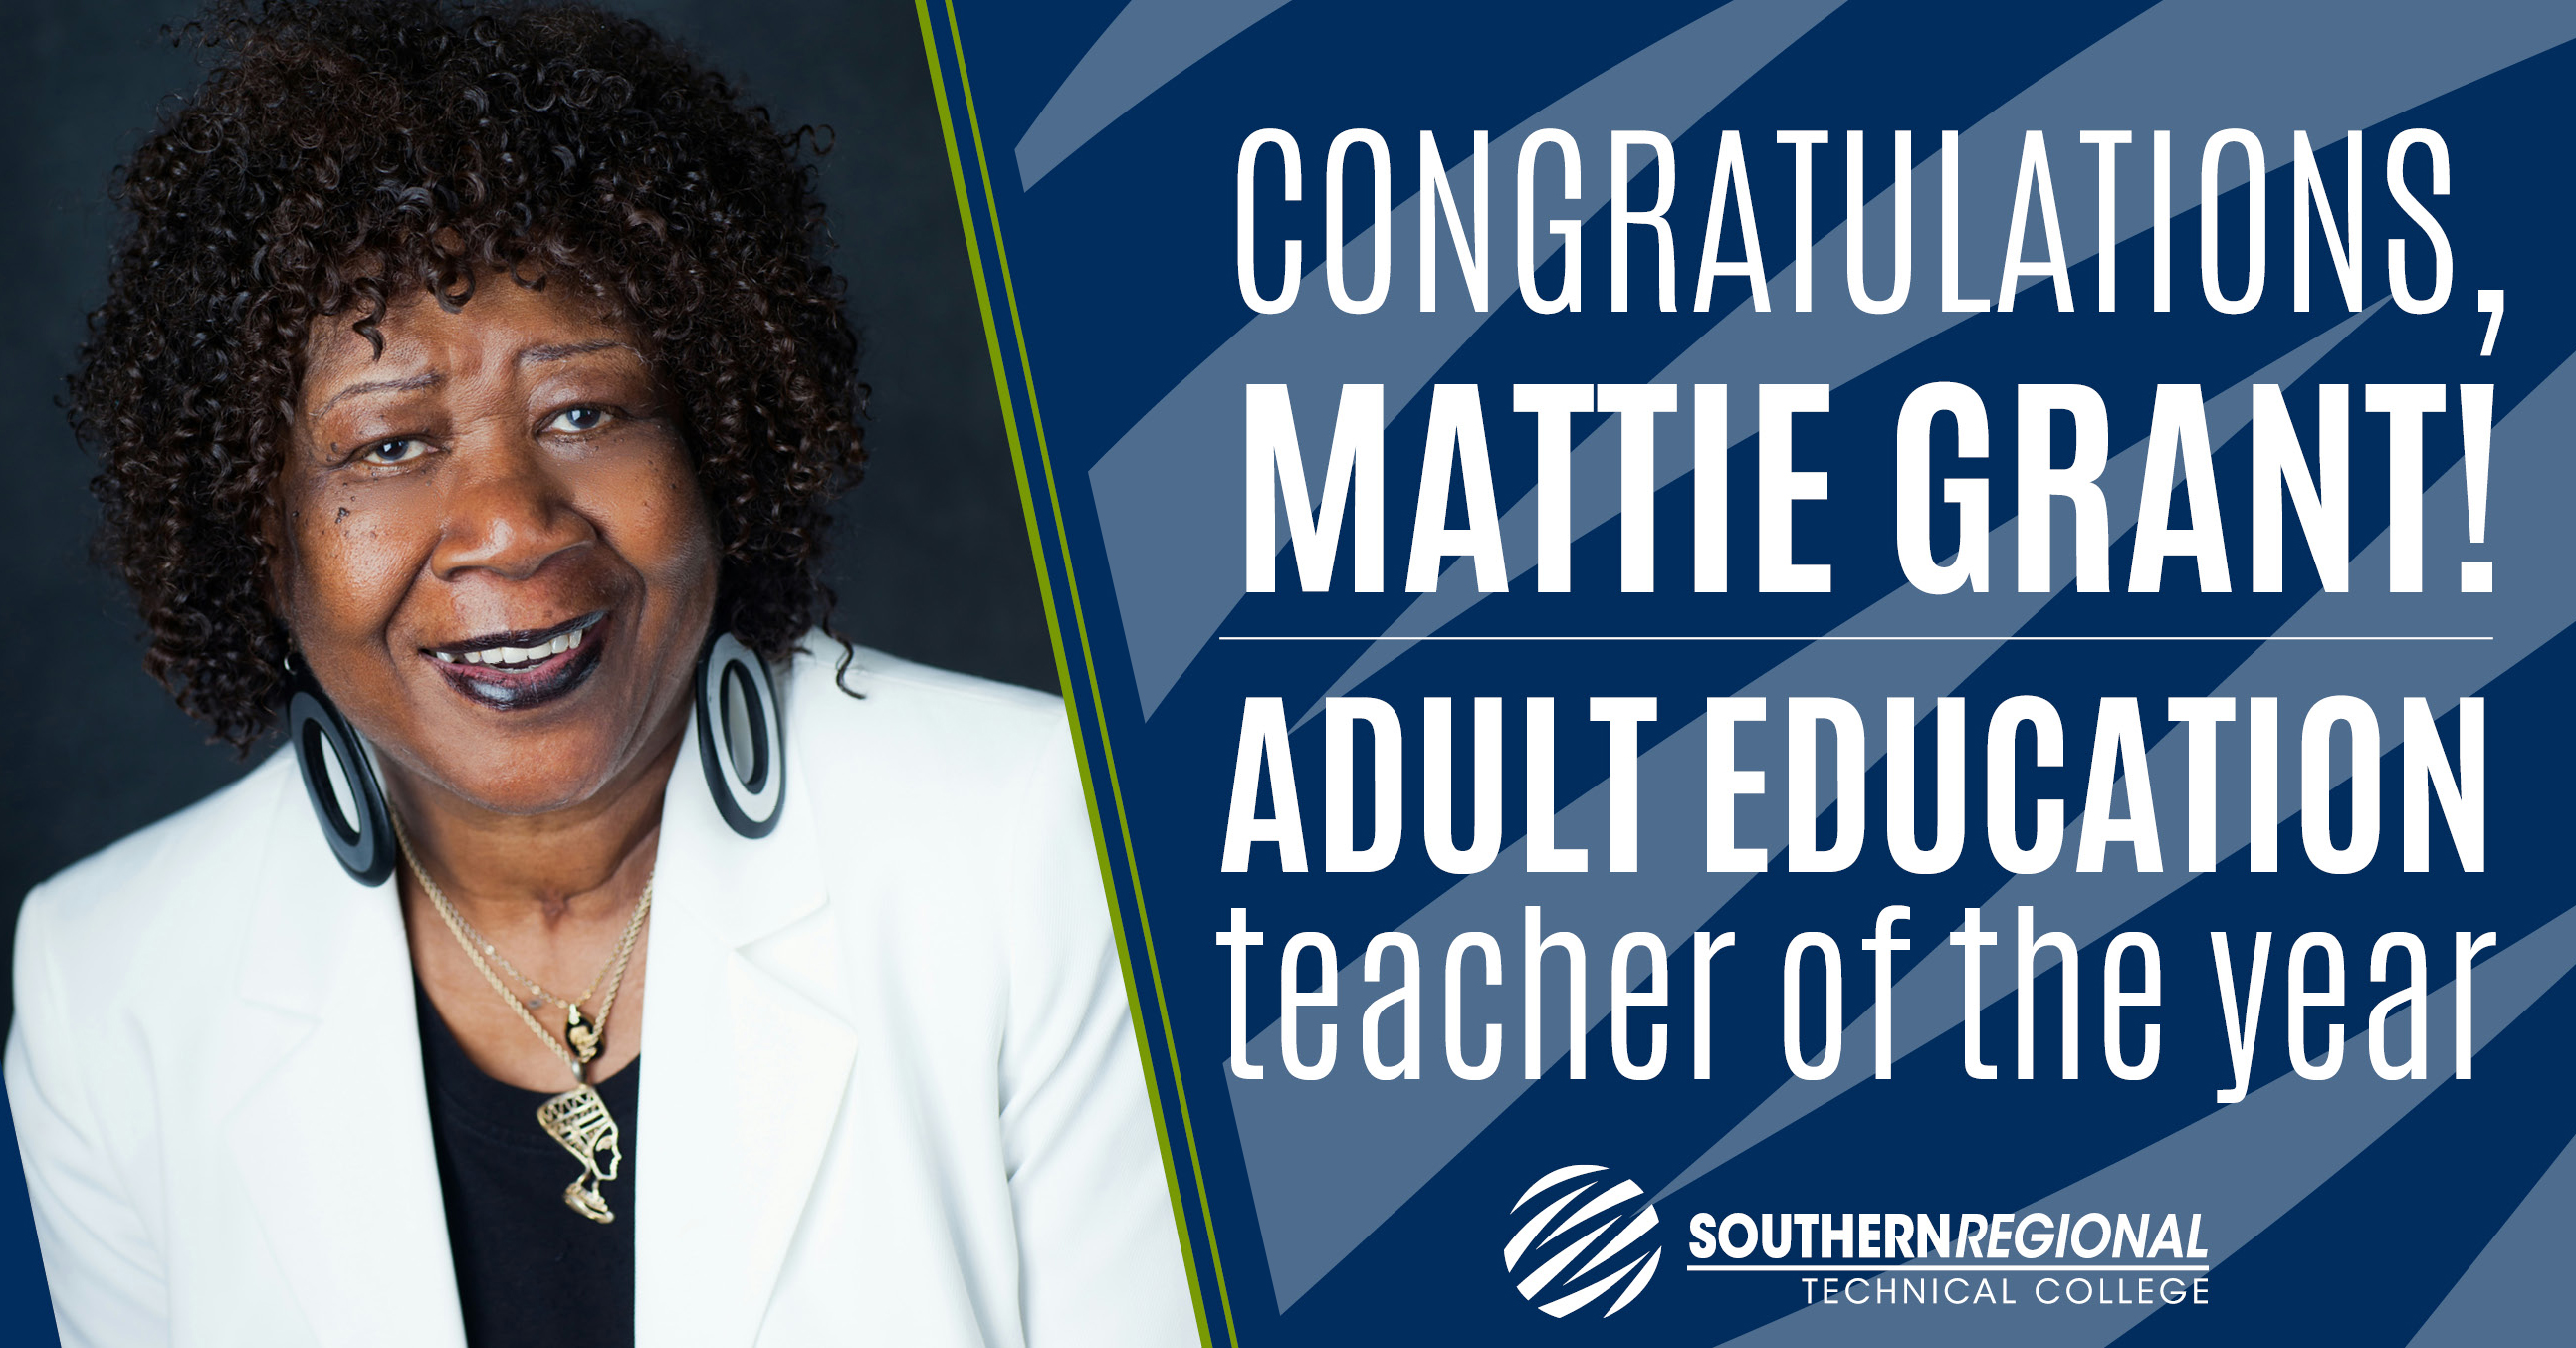 Photo for Mattie Grant Named SRTC Adult Education Teacher Of The Year 